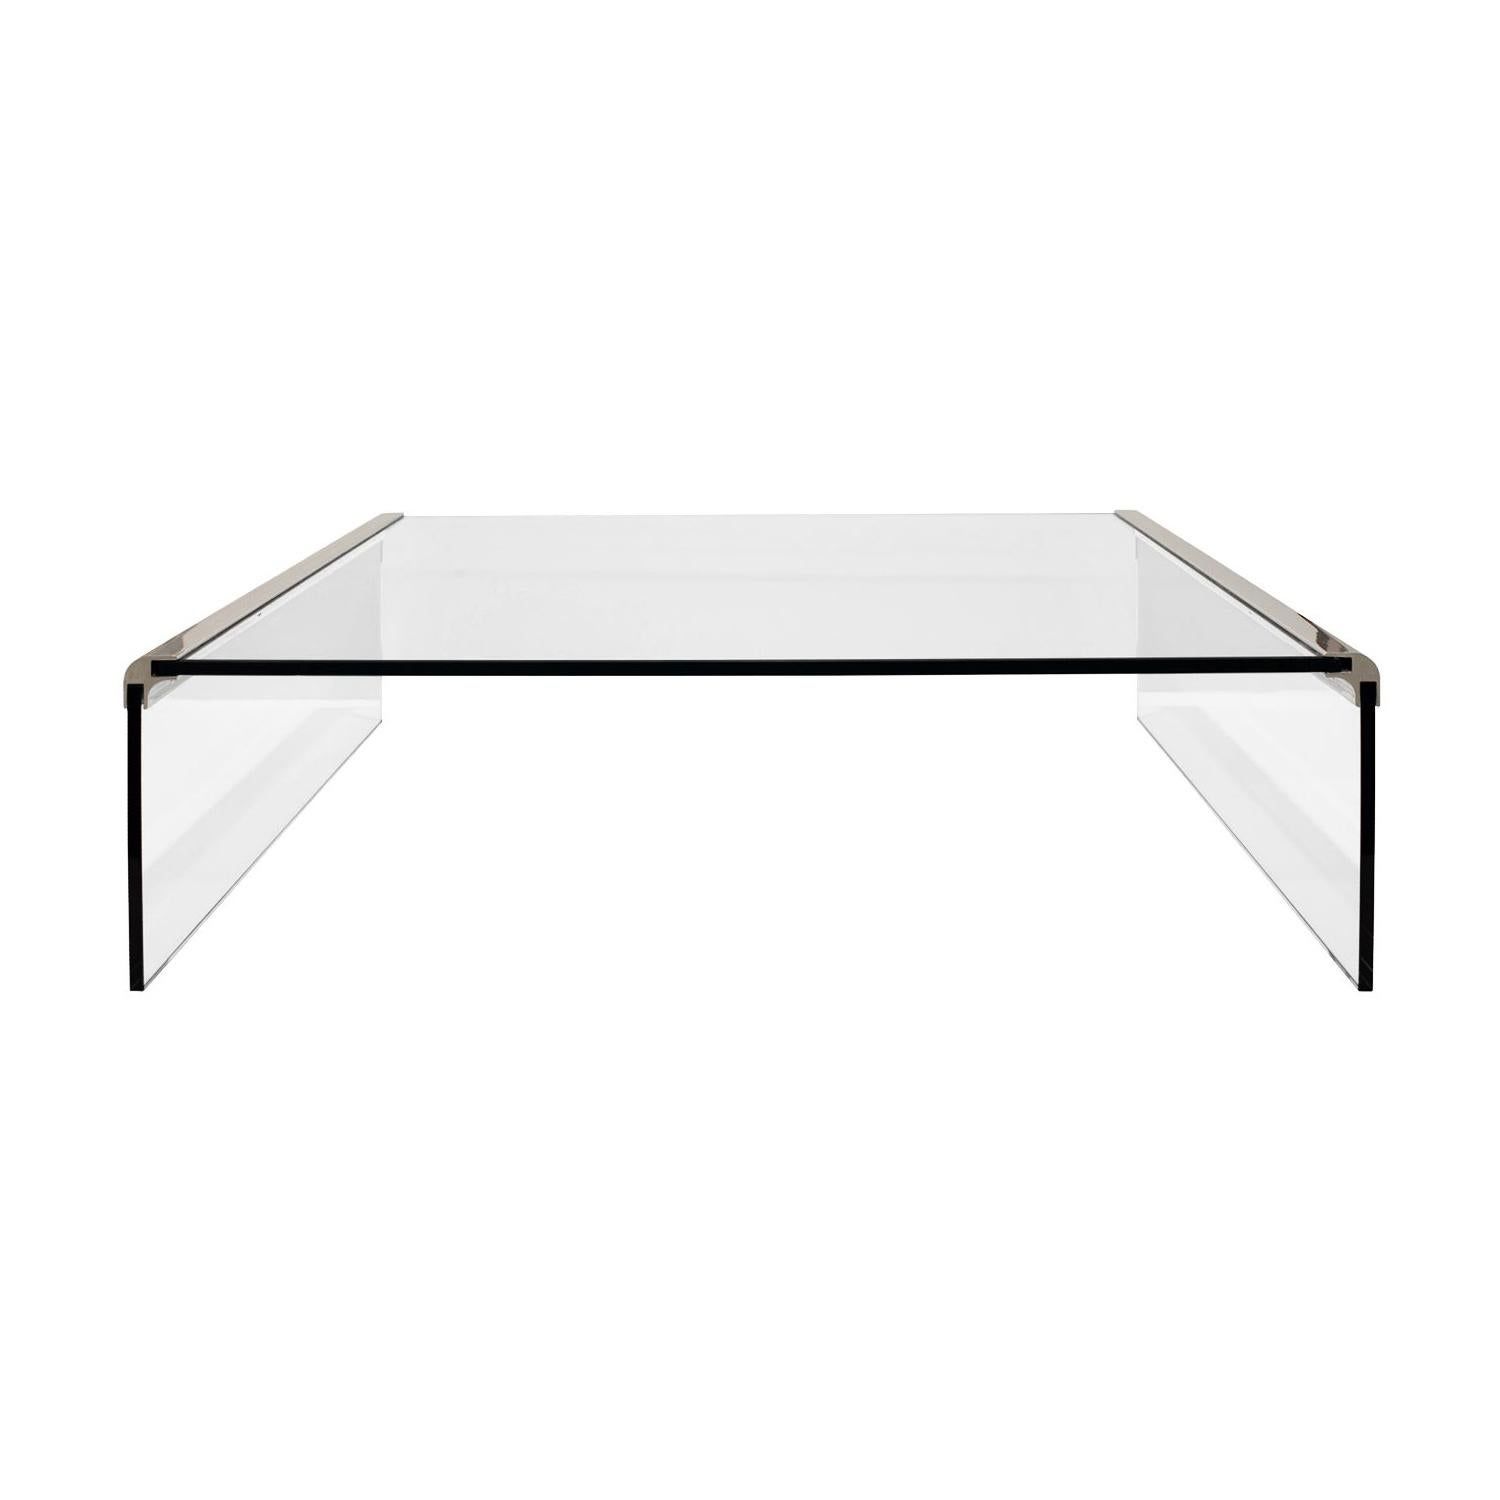 Modern Bent Glass Waterfall Coffee Table At 1stdibs Pertaining To Waterproof Coffee Tables (View 17 of 21)